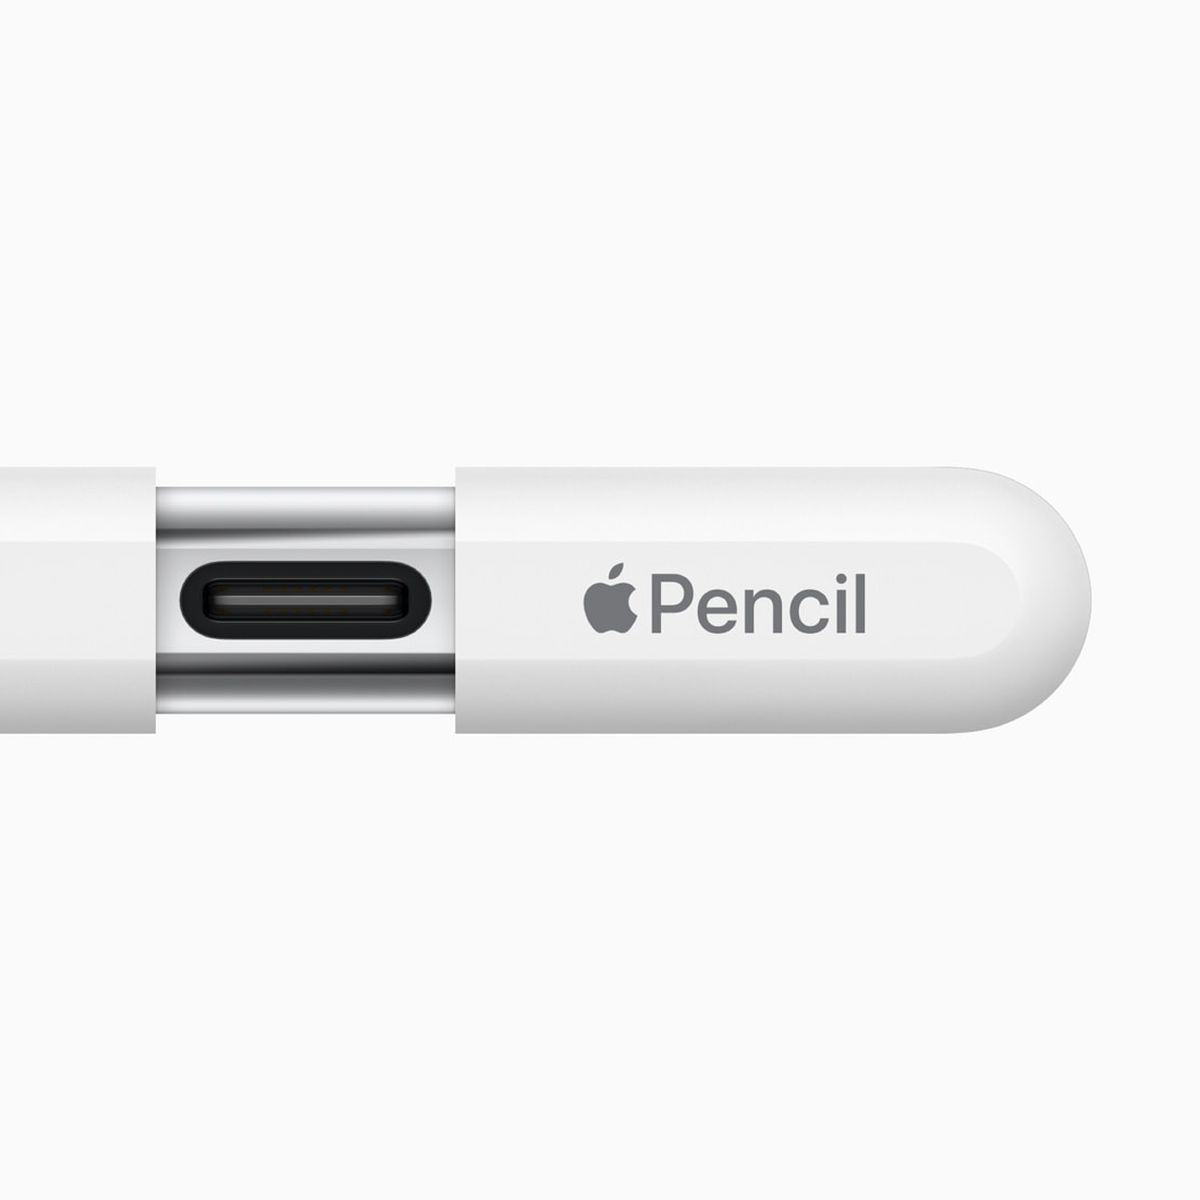 Apple's New Apple Pencil is More Affordable and Includes USB-C - IGN